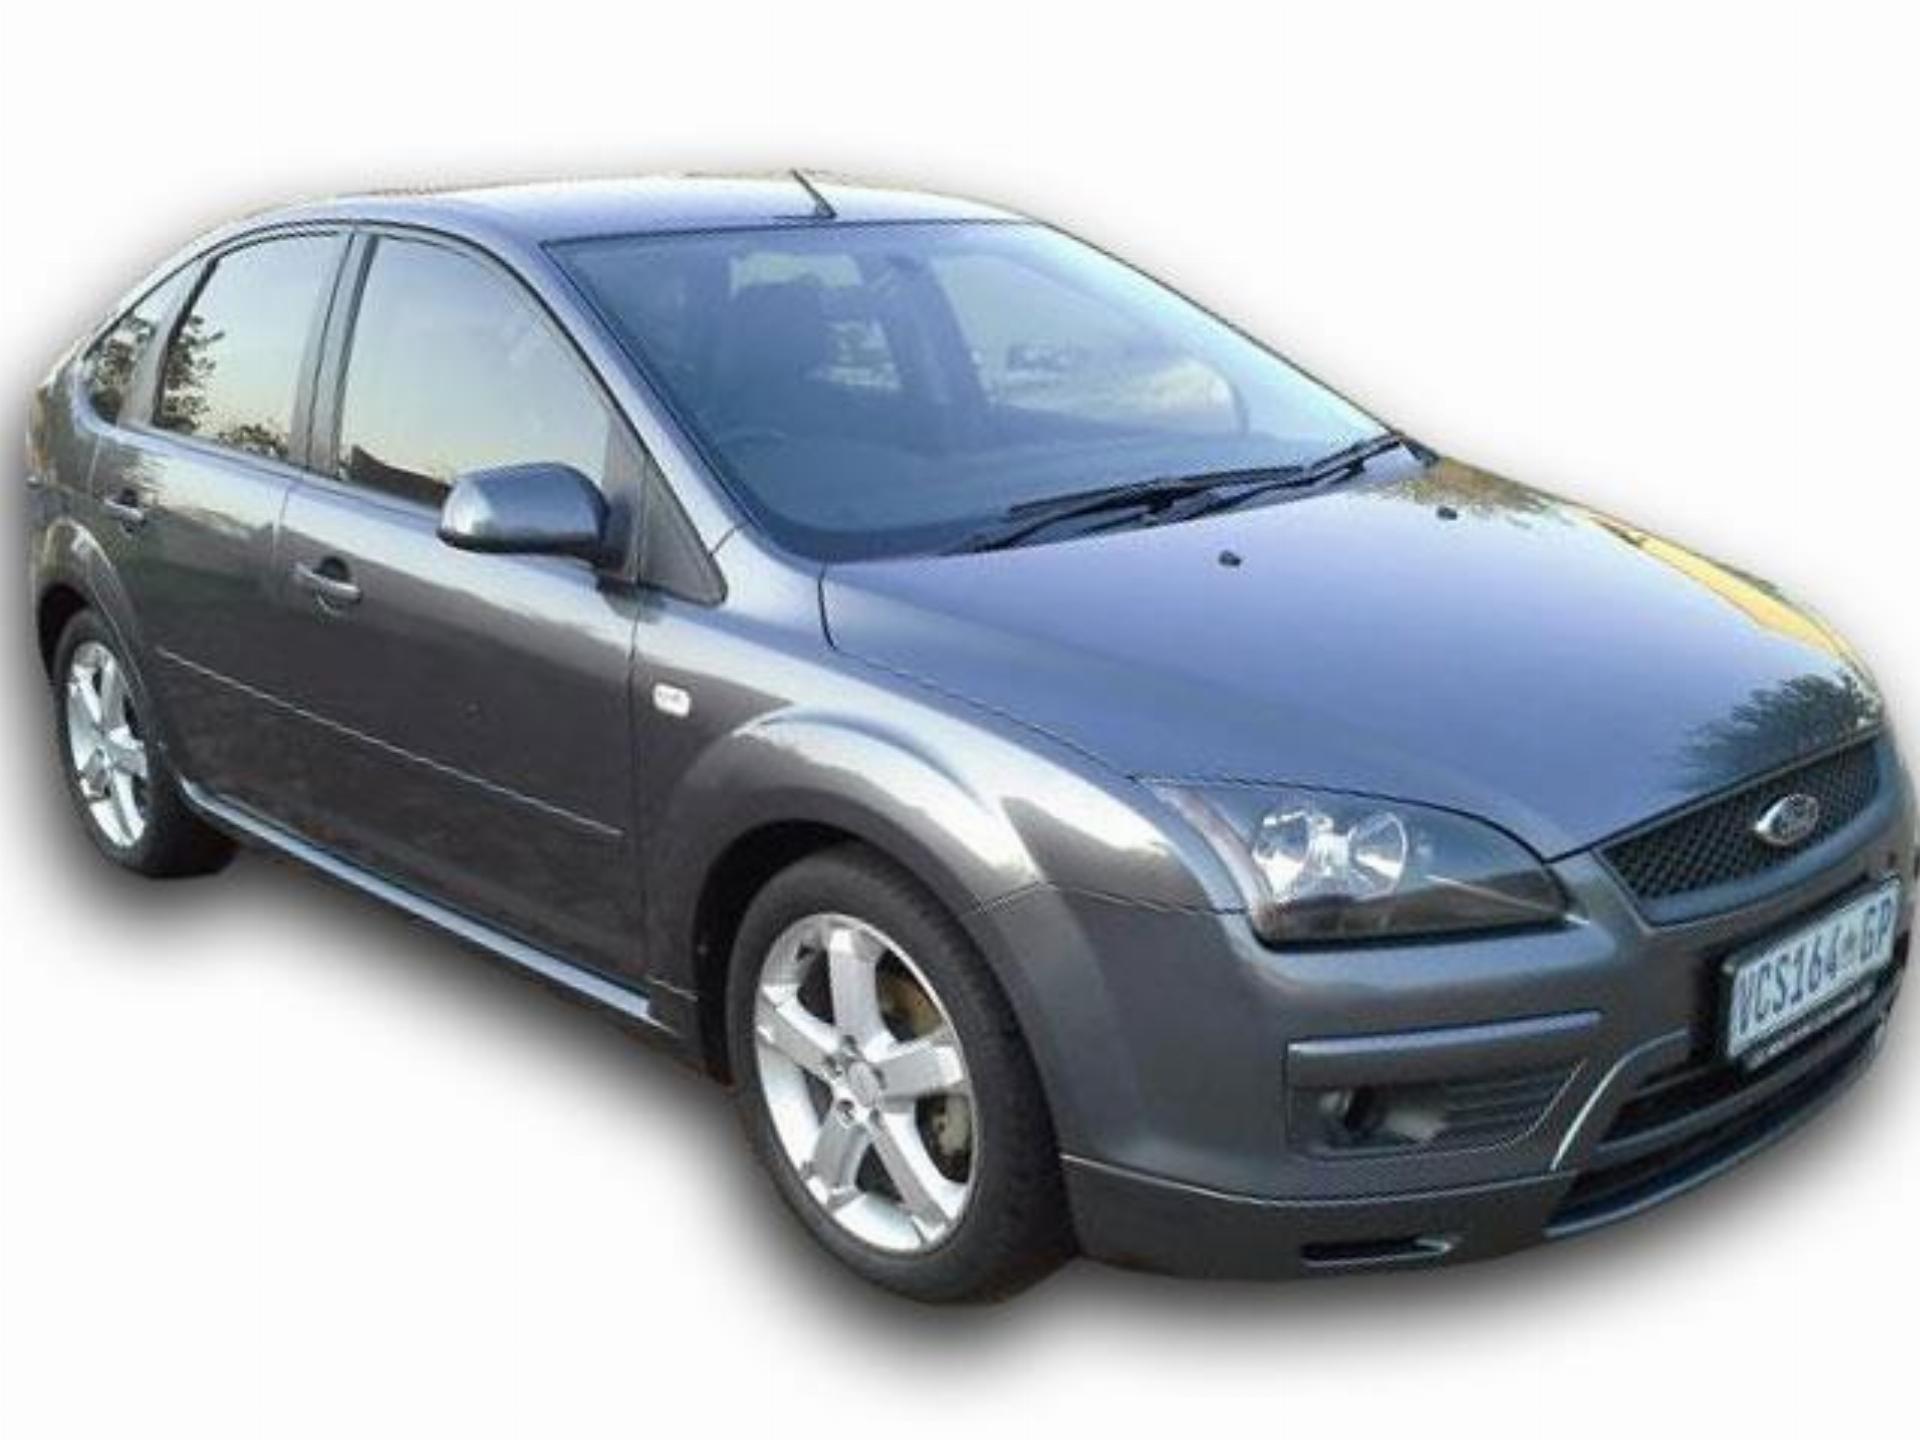 Used Ford Focus 1.6 SI 5DR 2006 on auction PV1002941